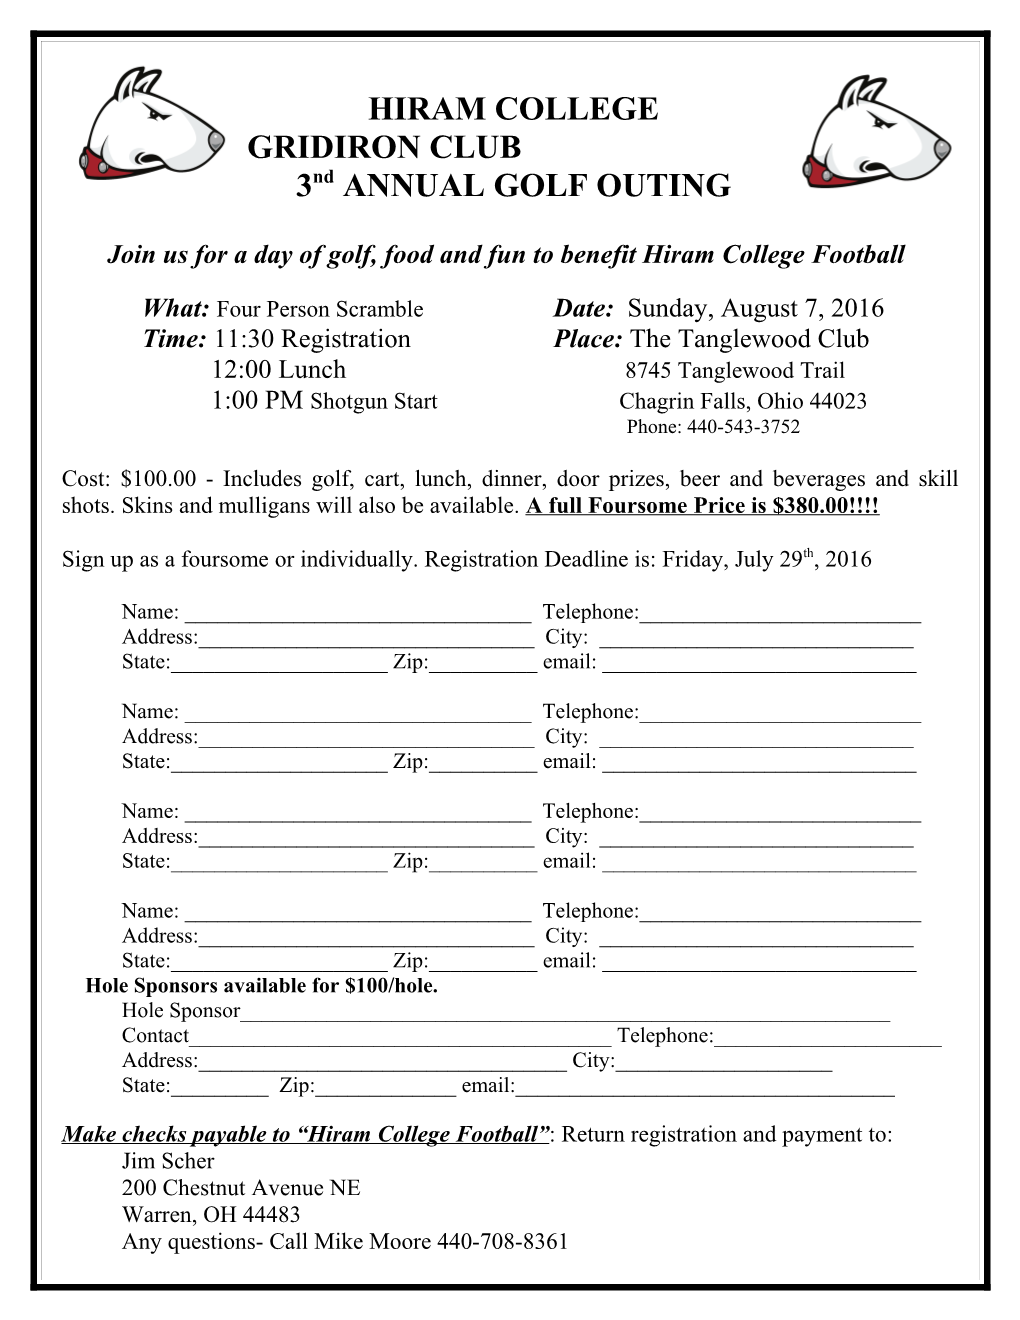 Join Us for a Day of Golf, Food and Fun to Benefit Hiram College Football